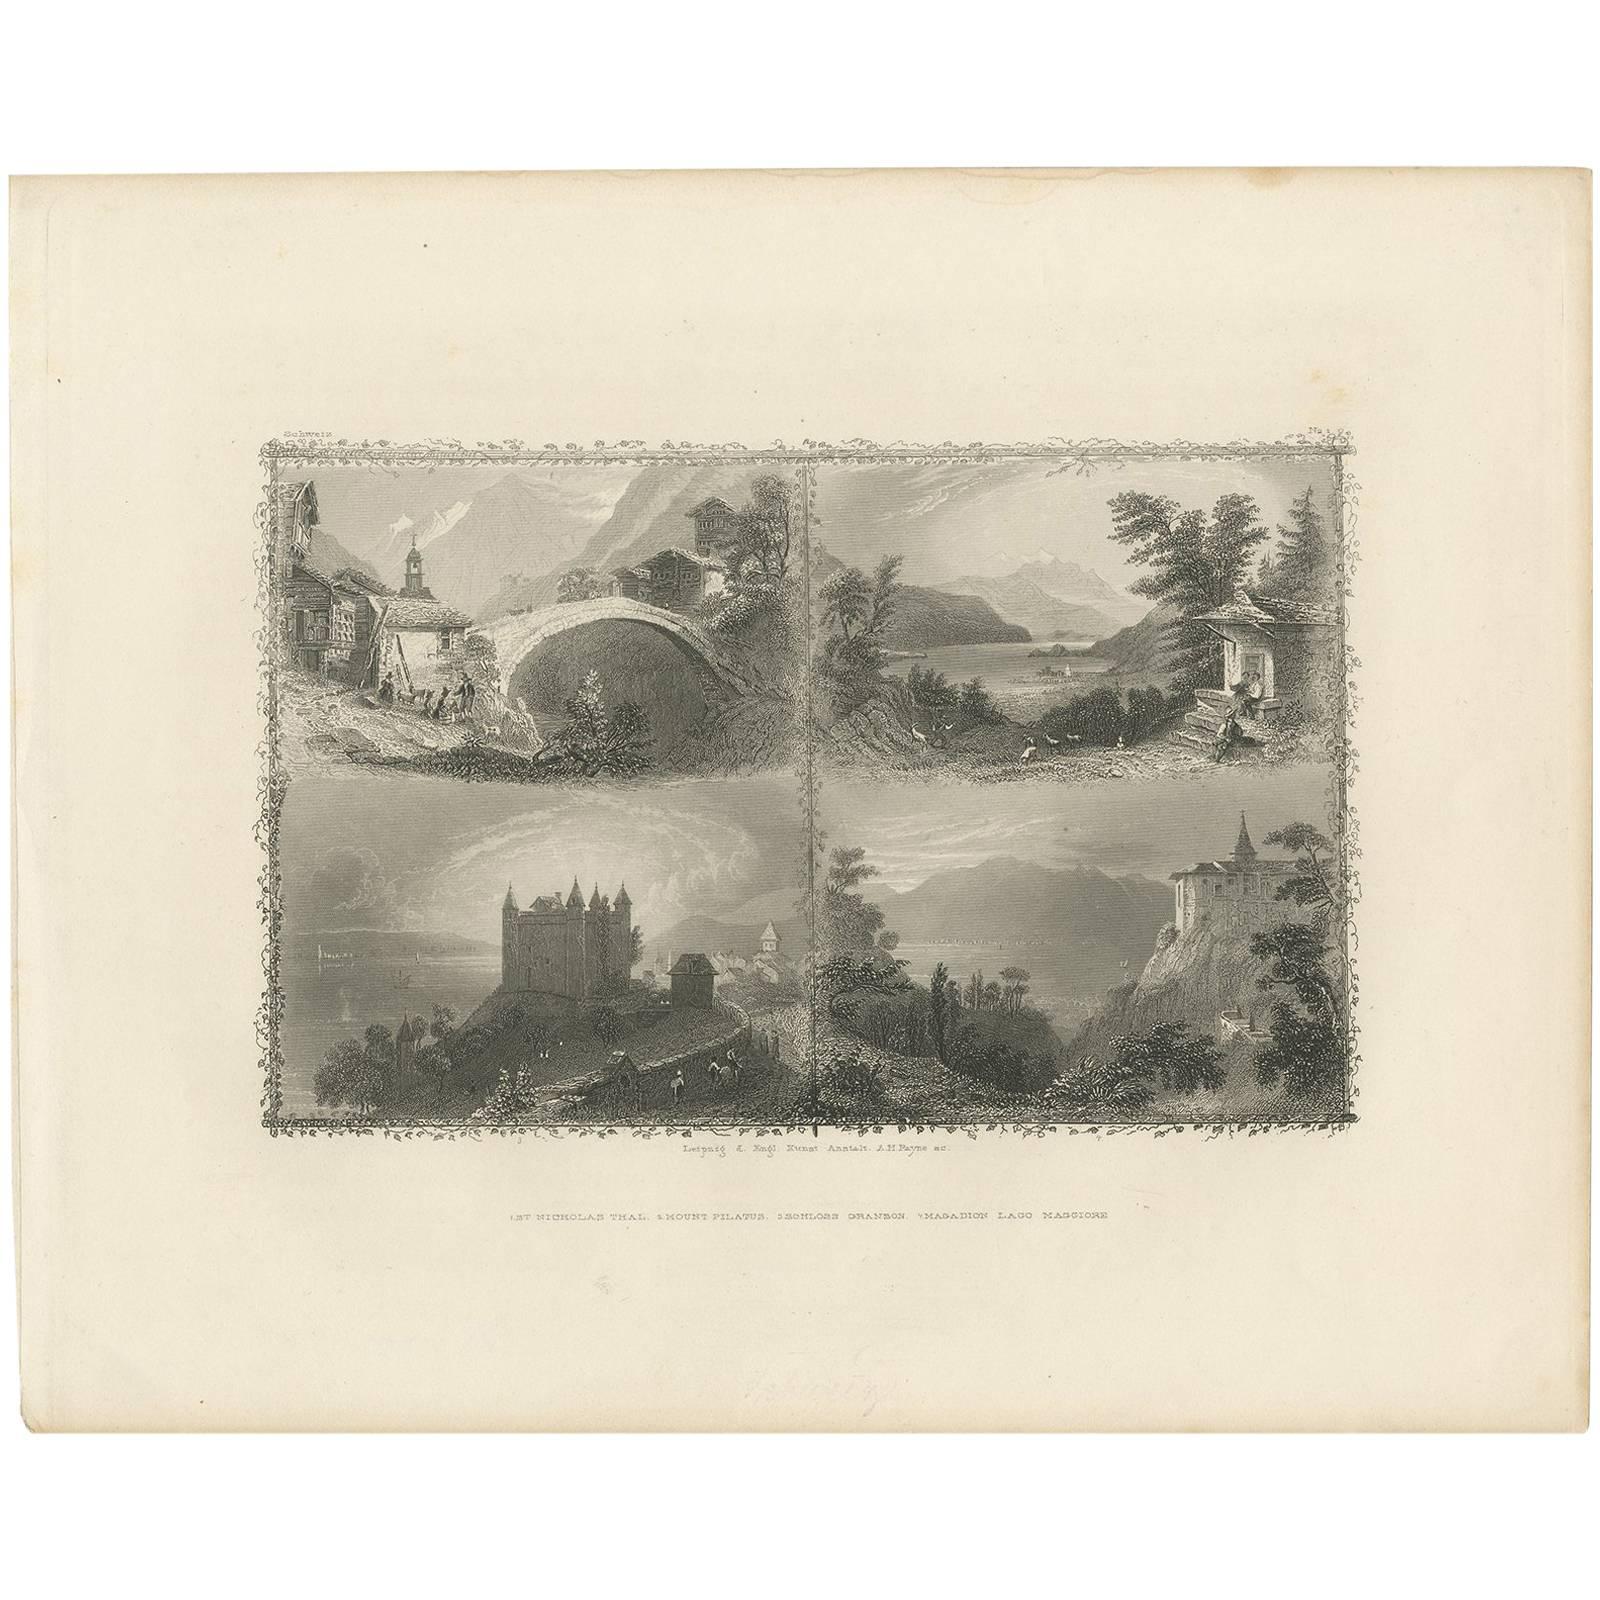 Antique Print with views of Switzerland by A.H. Payne, circa 1850